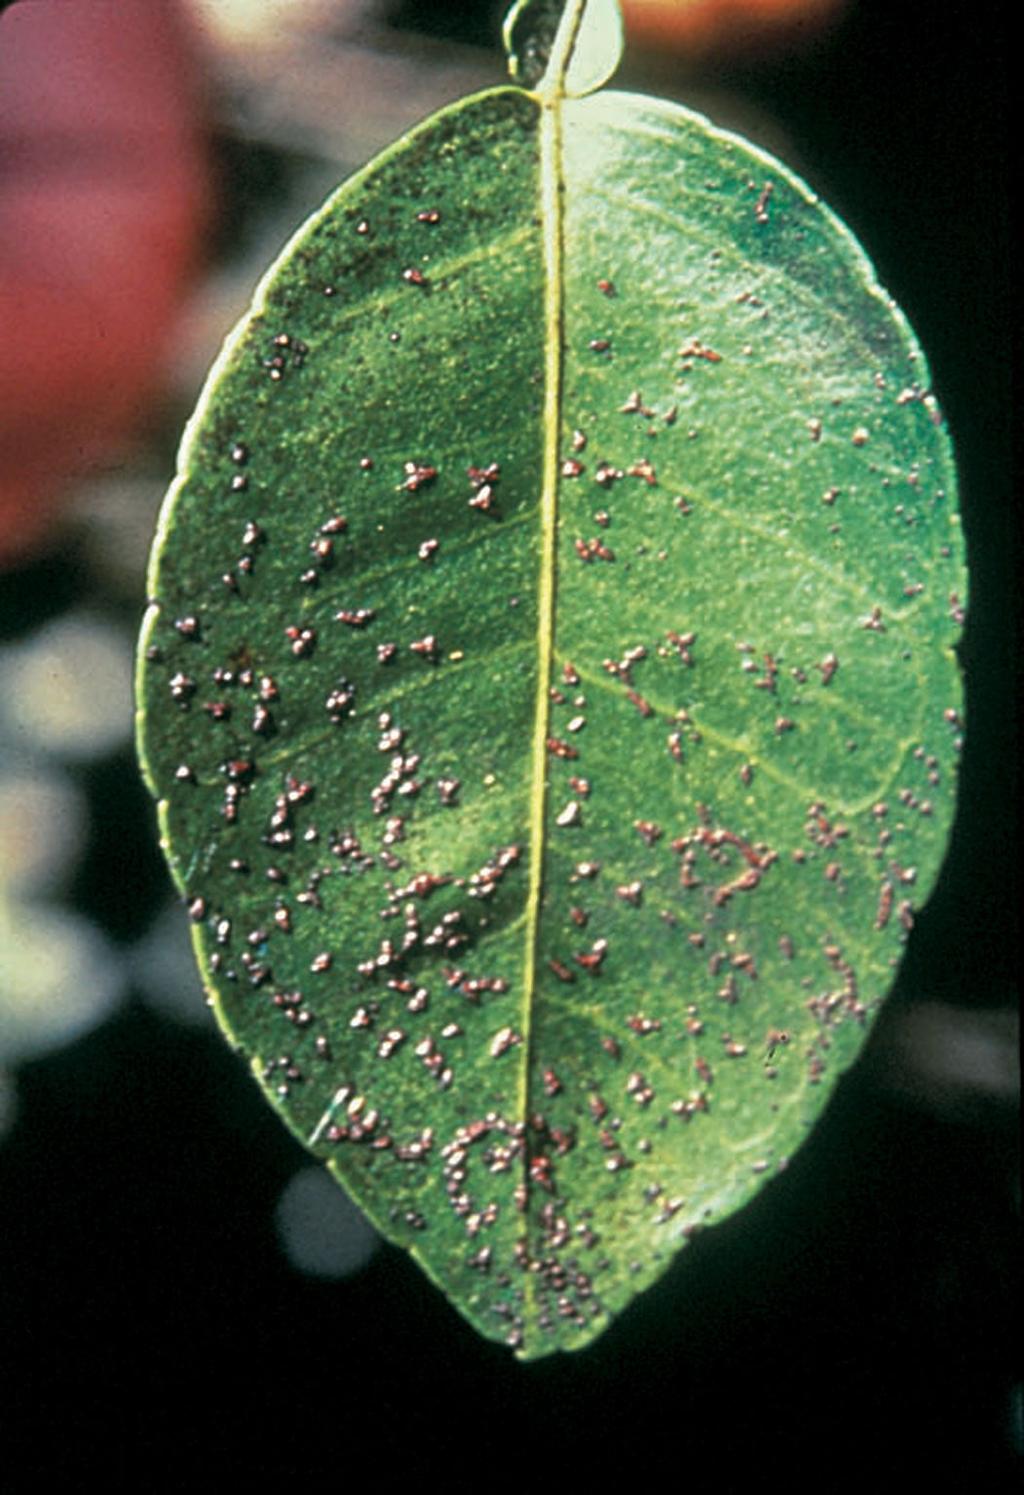 Alternaria Brown Spot (Alternaria alternata) This fungus attacks fruit, leaves, and young shoots of susceptible varieties.